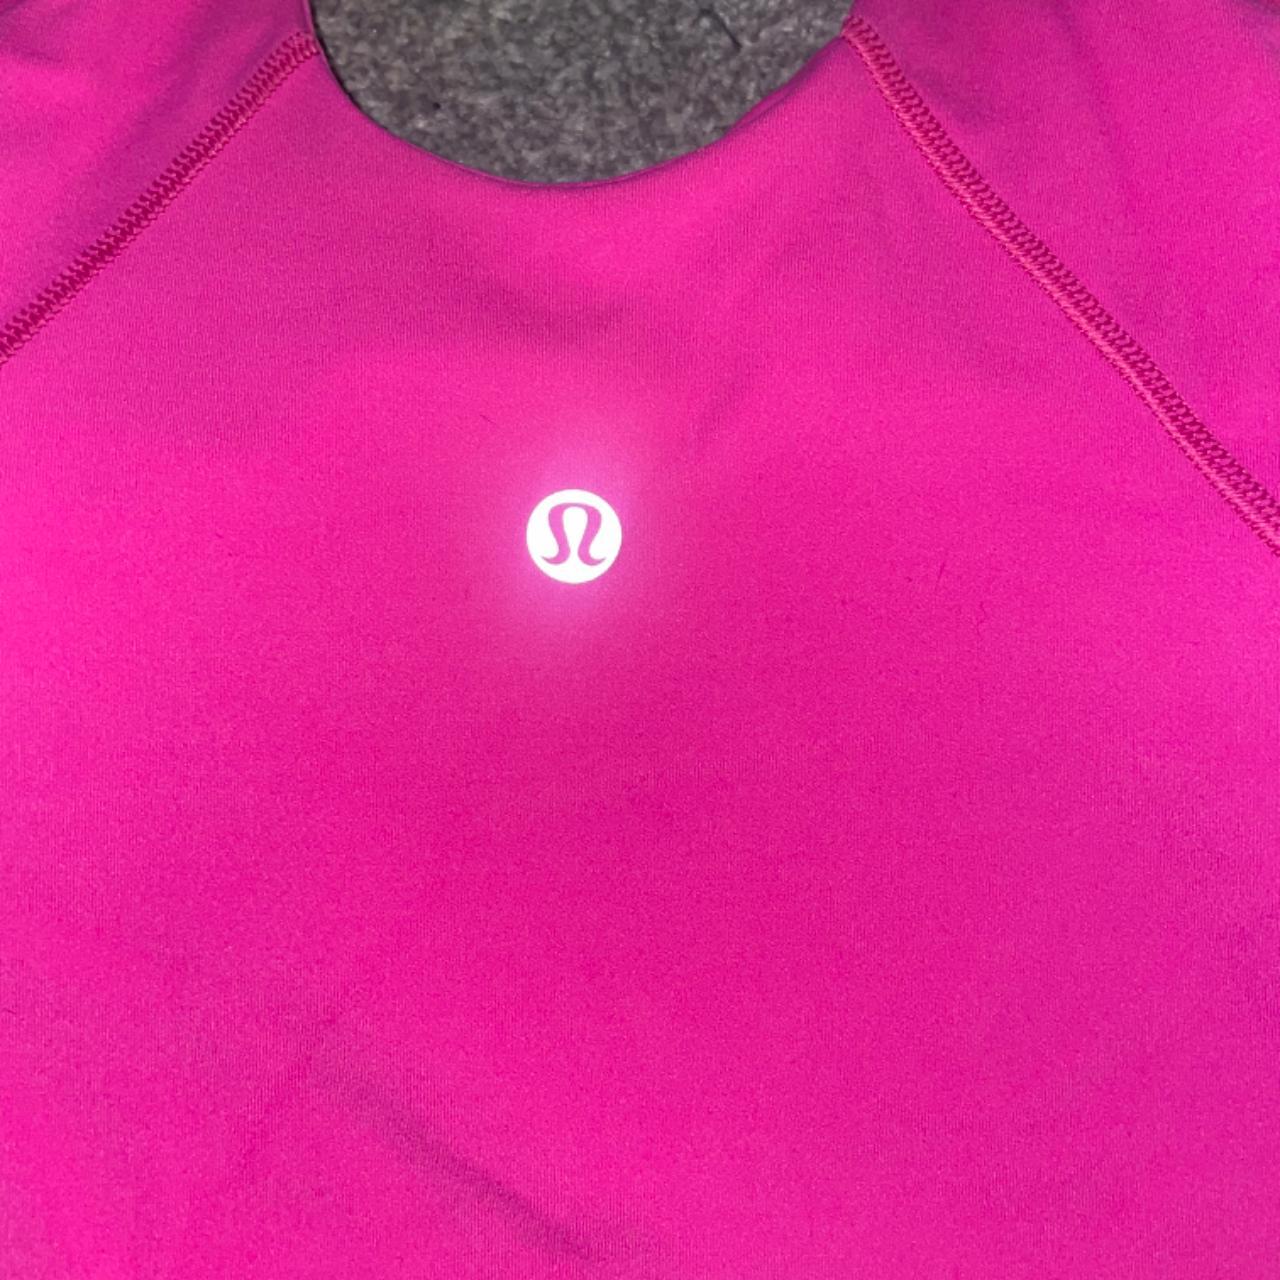 Sonic pink align tank size 4 TRADES ONLY! do not - Depop